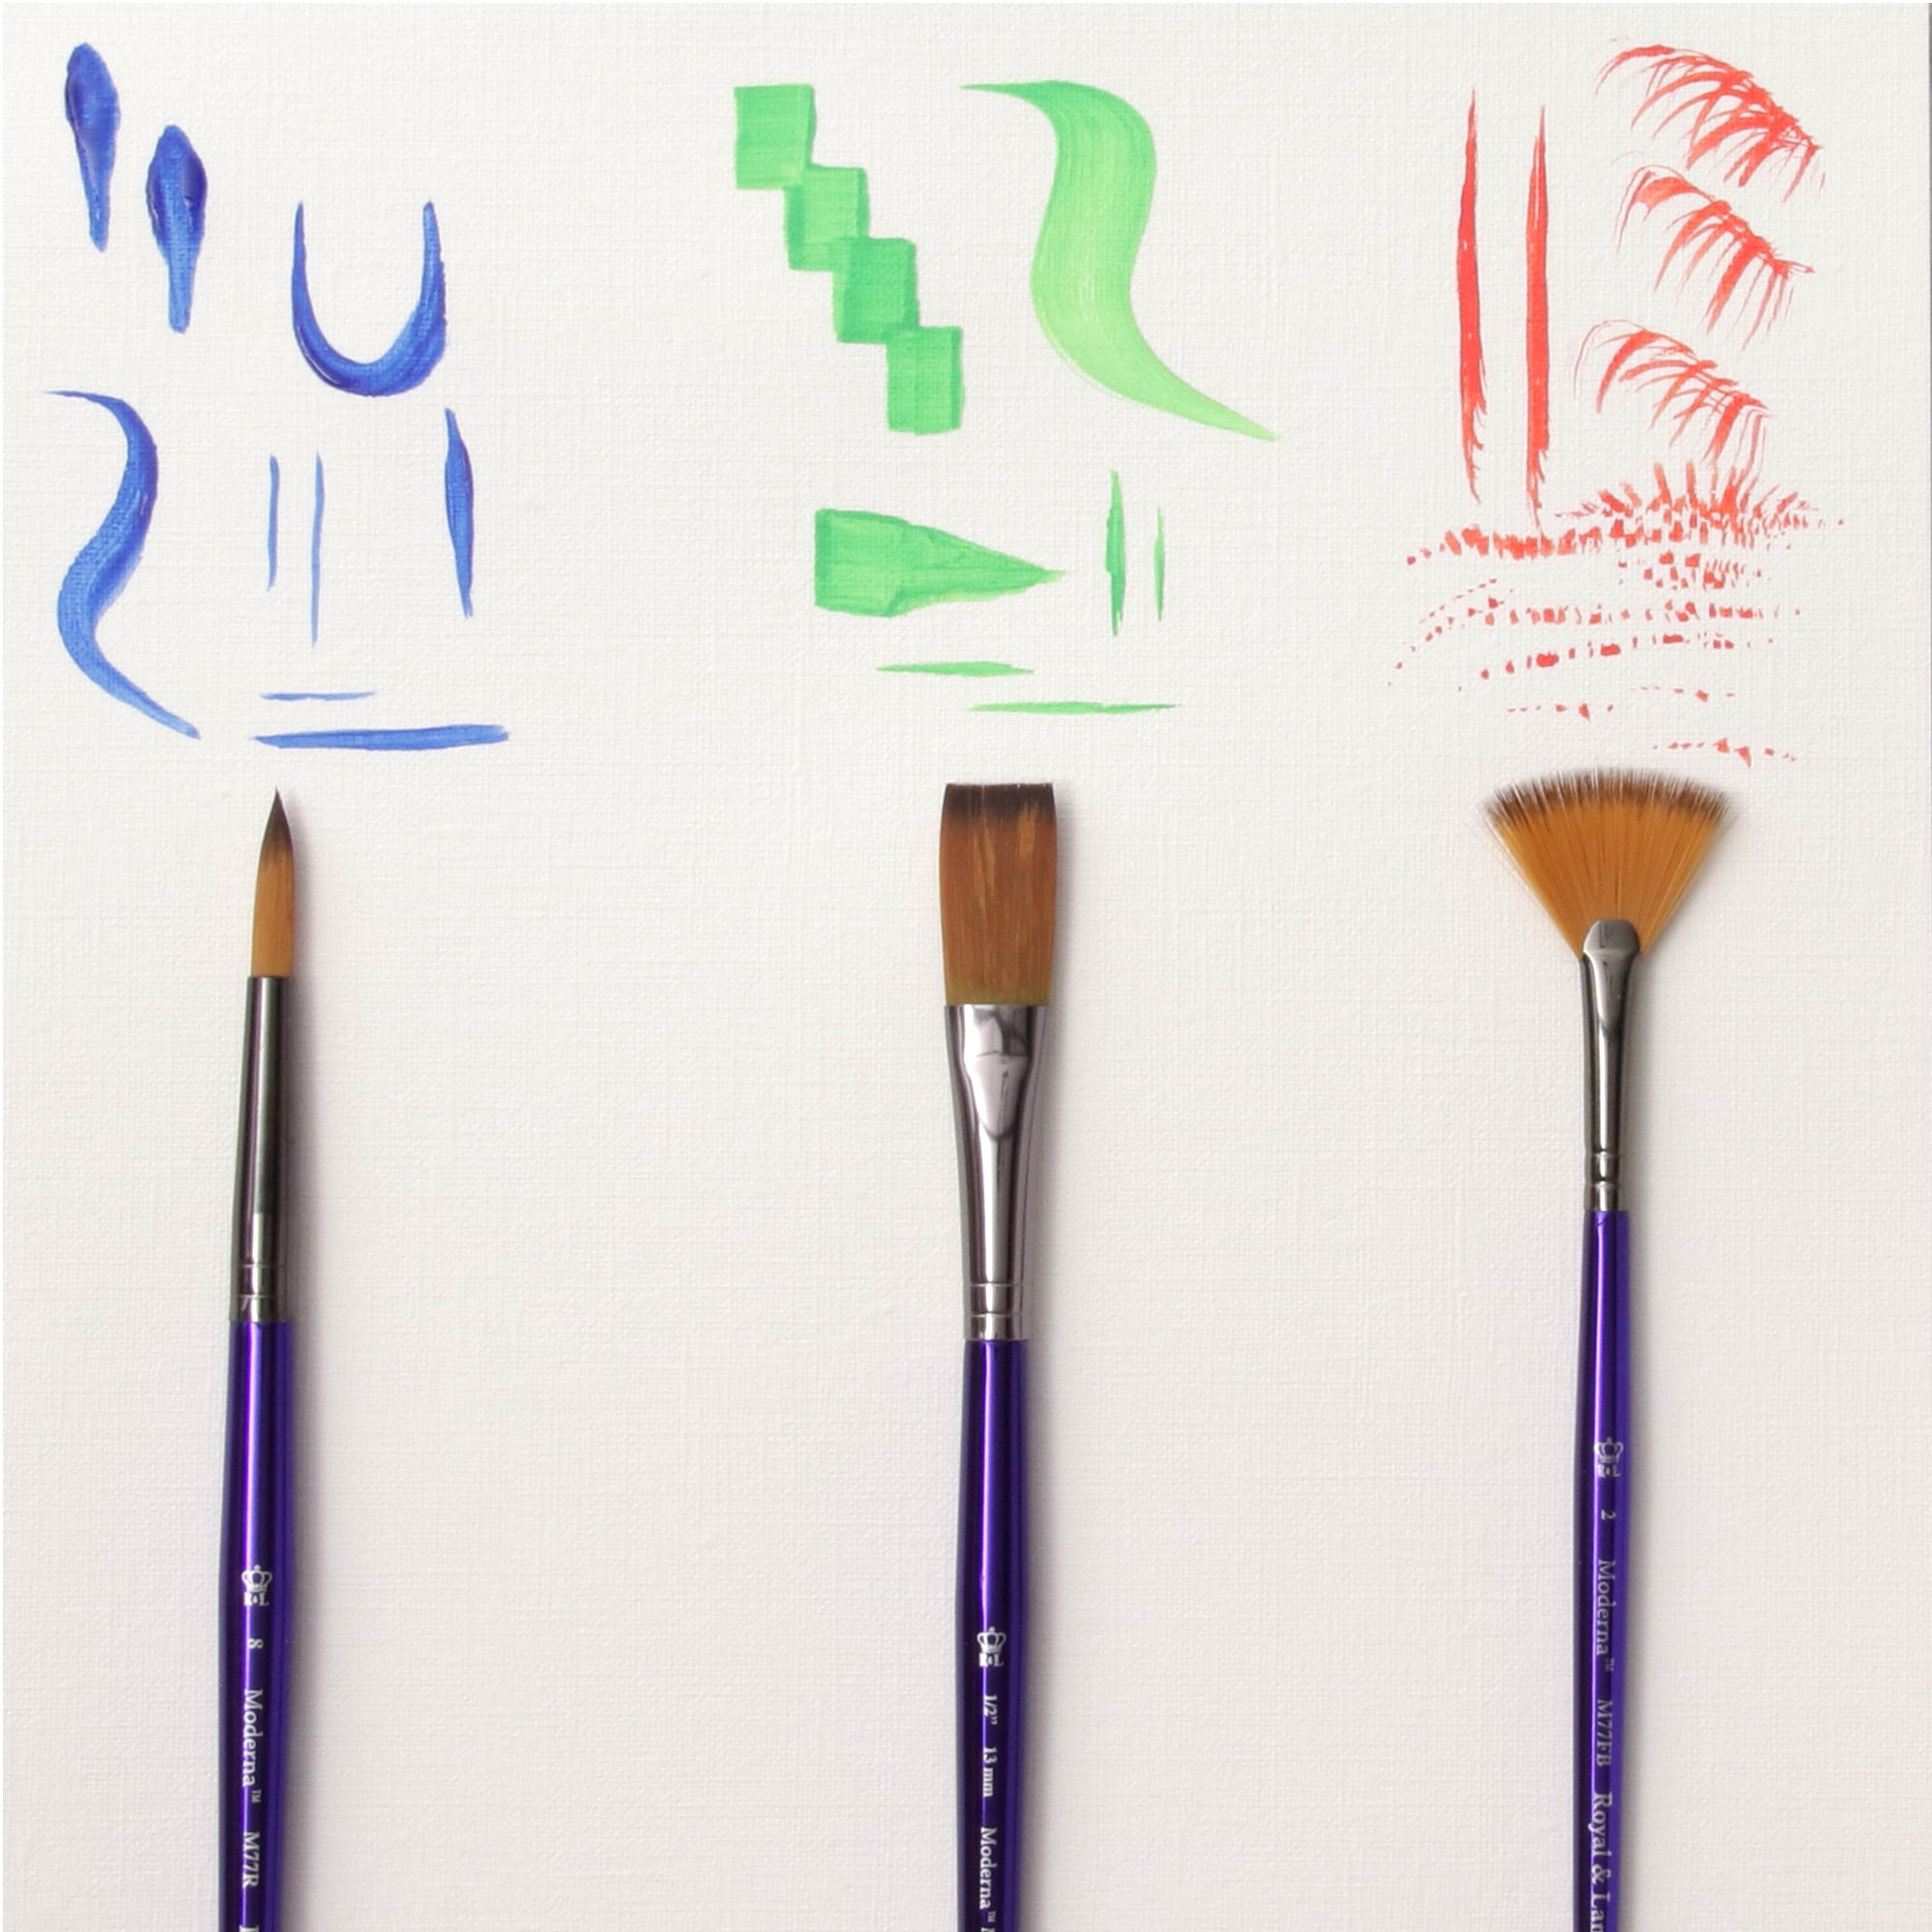 Round, Flat, Fan: How to Use These 3 Classic Brushes